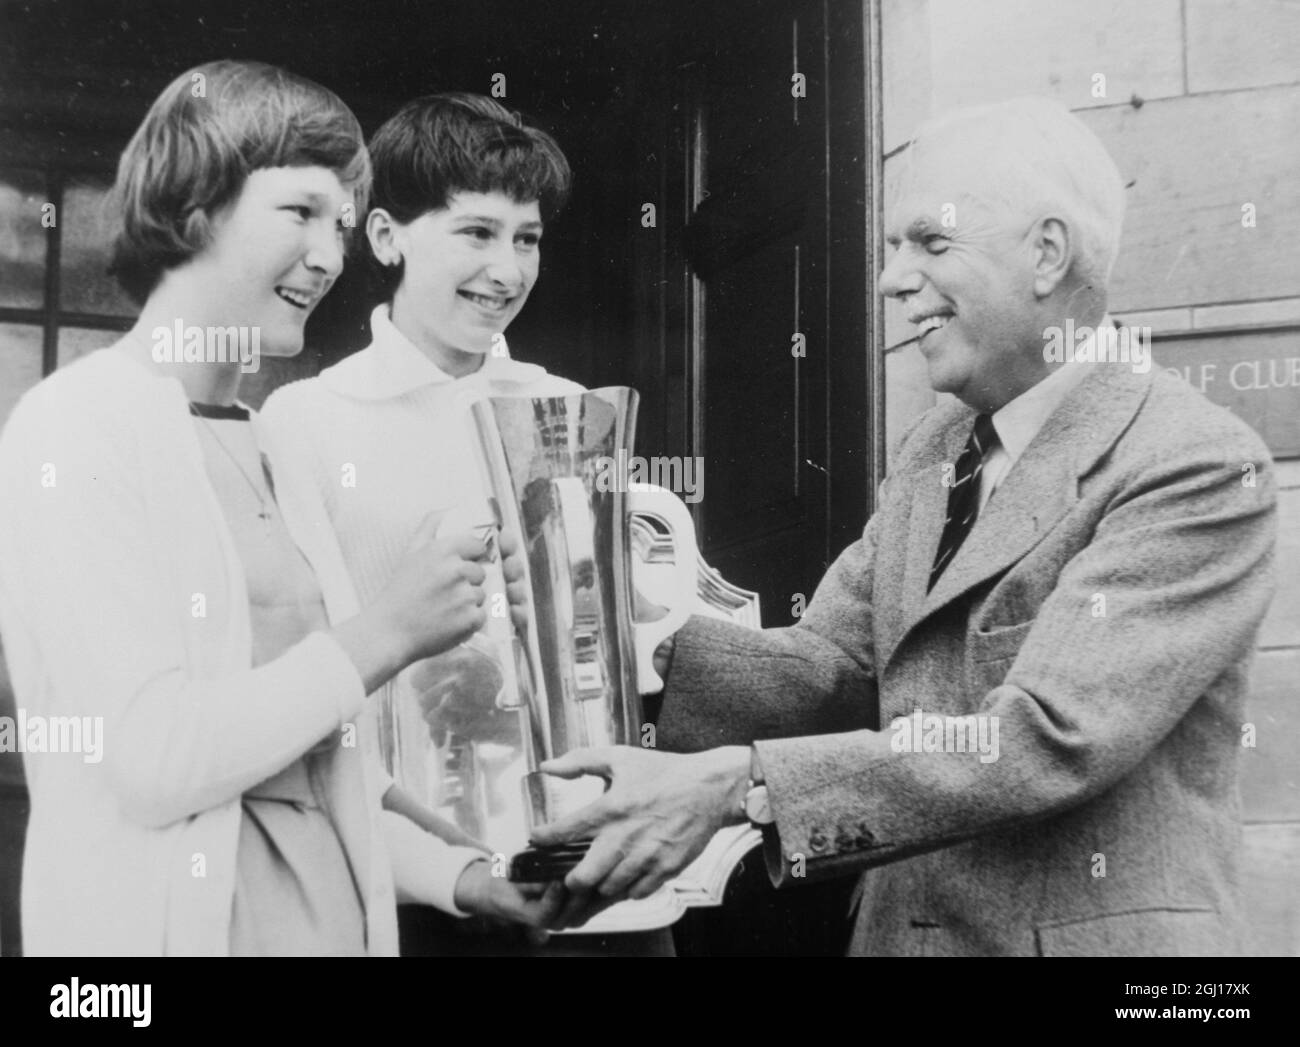 GOLF GIRLS CHAMPIONSHIPS - DINAH OXLEY AND BARBARA WHITEHEAD RECEIVE TROPHY FROM IAN BOWHILL IN SCOTLAND ; 31 AUGUST 1963 Stock Photo